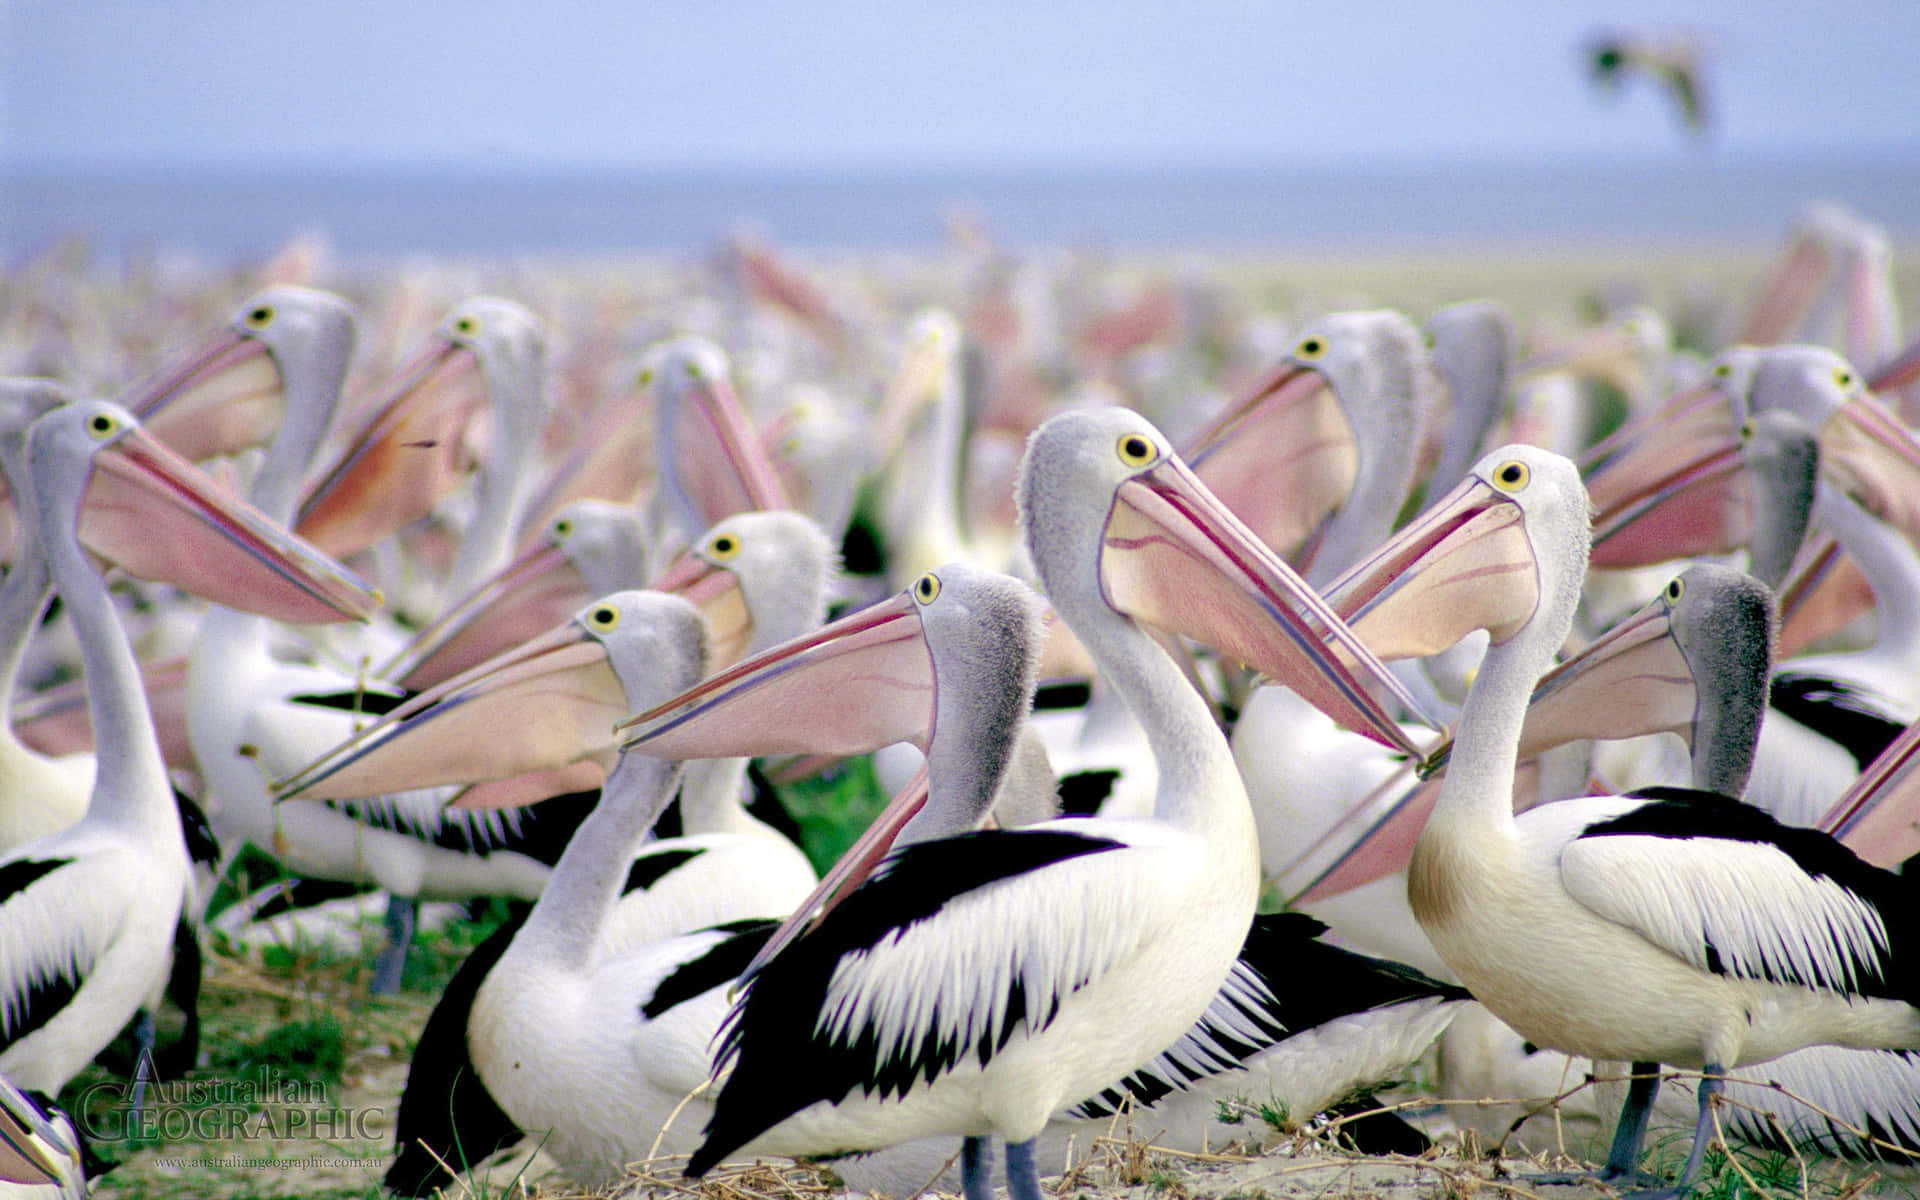 A flock of pelicans taking in the sun by the shore